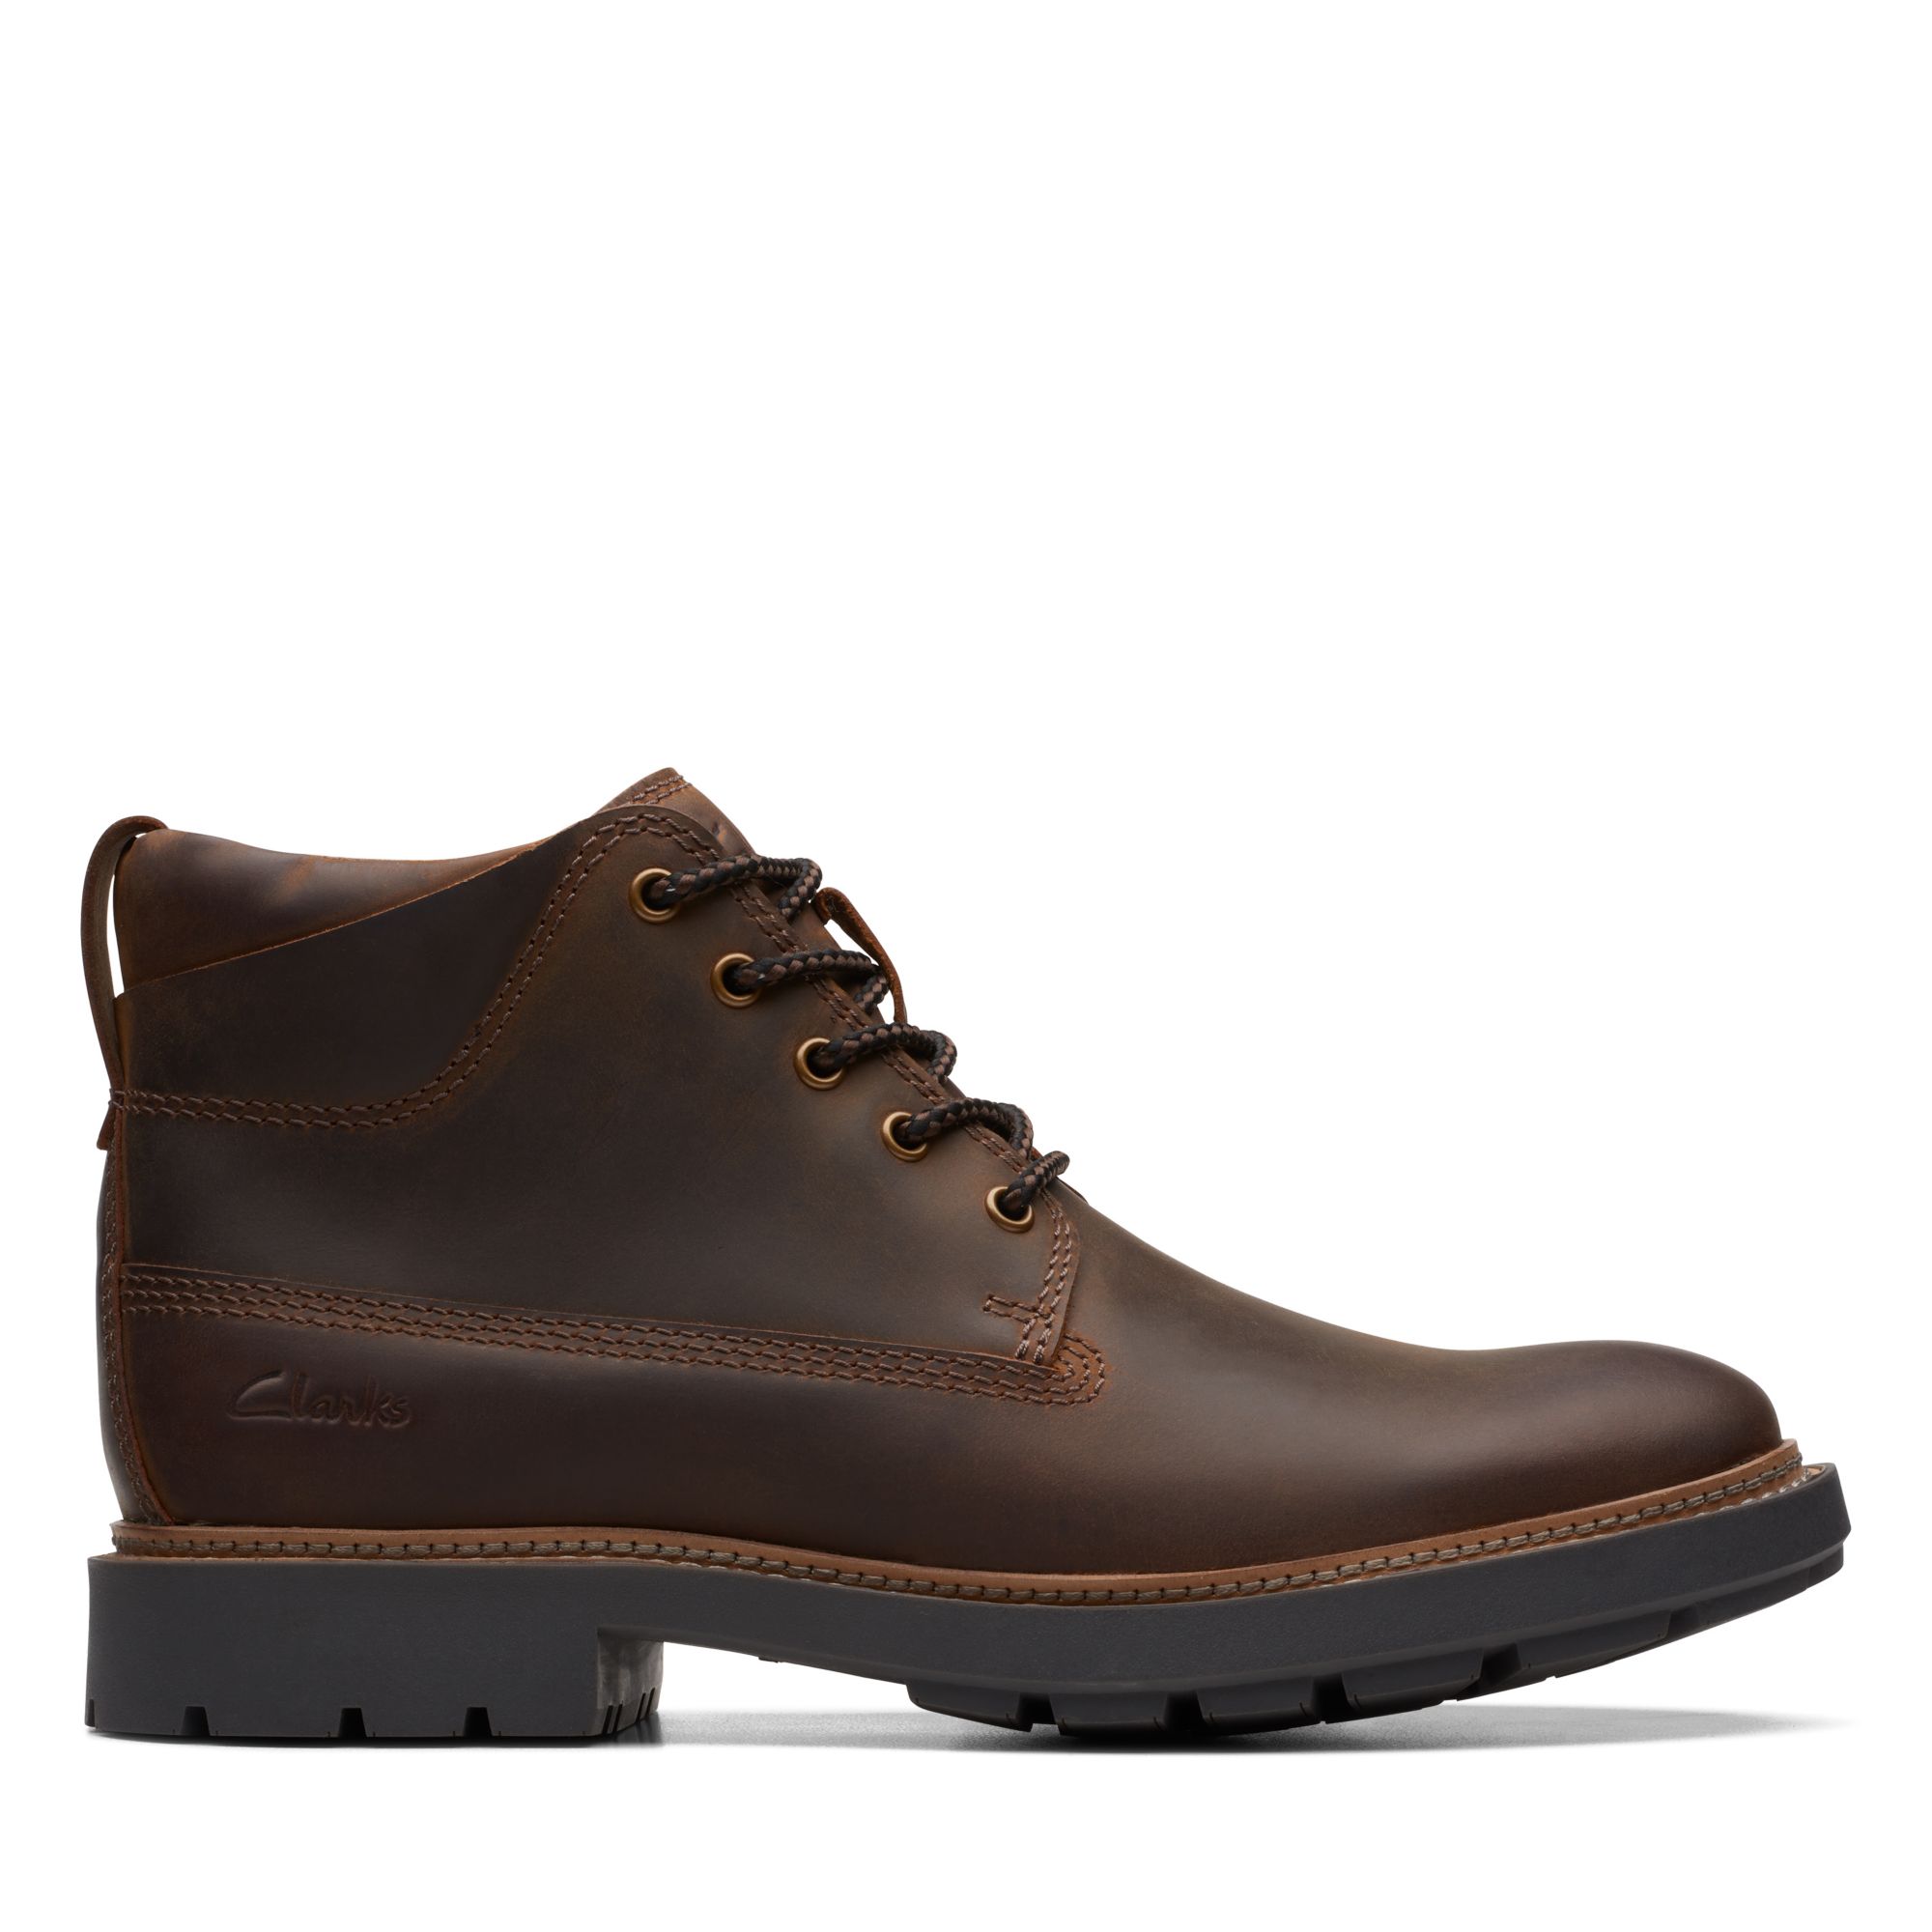 CLARKS CRAFTDALE 2 MID